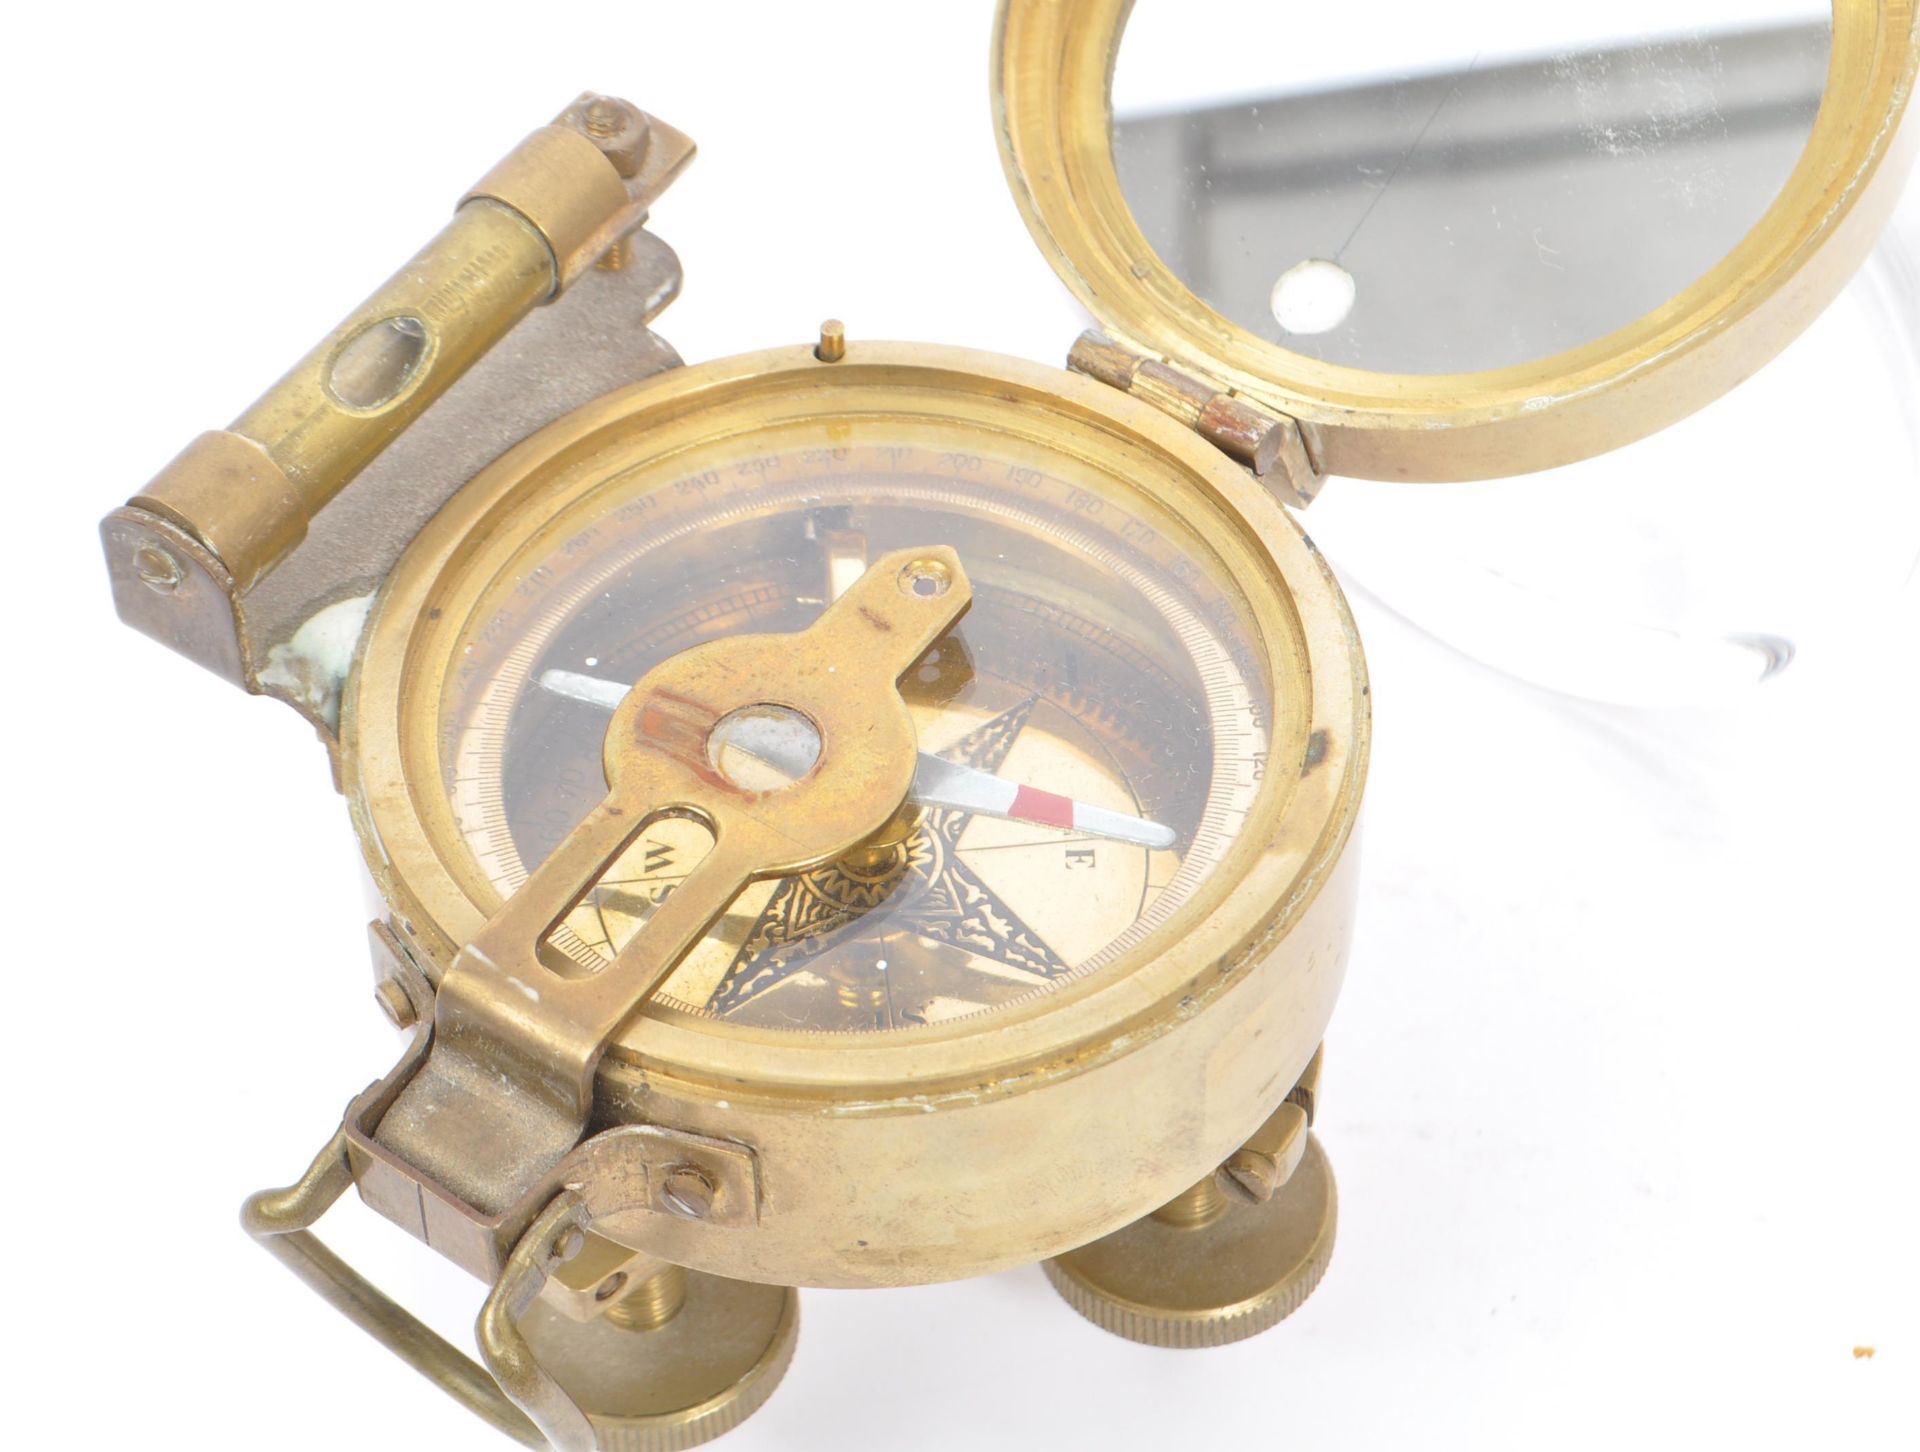 NATURAL SINE BRASS CASED COMPASS WITH SPIRIT LEVEL - Image 3 of 8